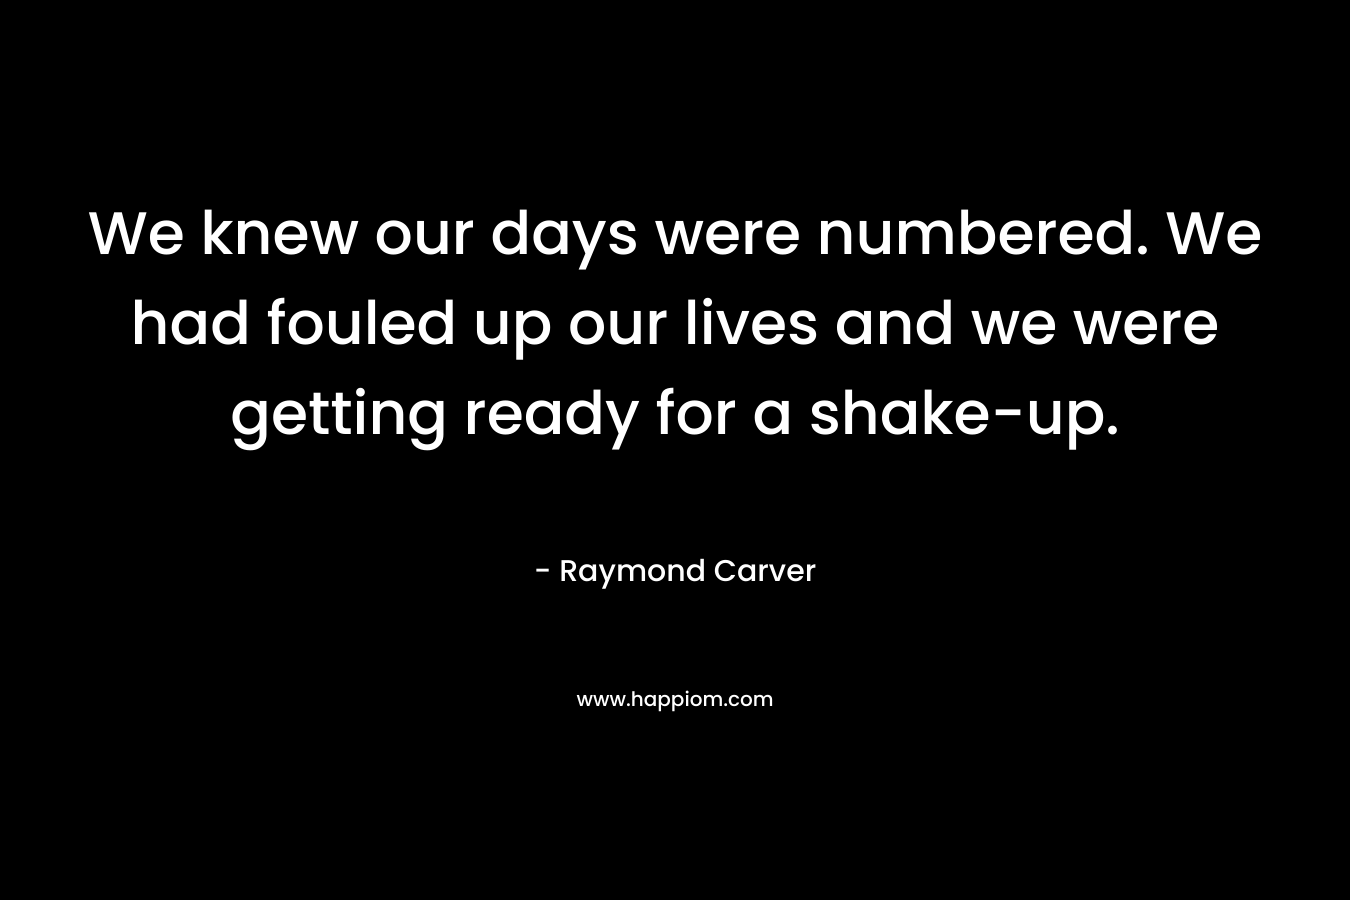 We knew our days were numbered. We had fouled up our lives and we were getting ready for a shake-up. – Raymond Carver